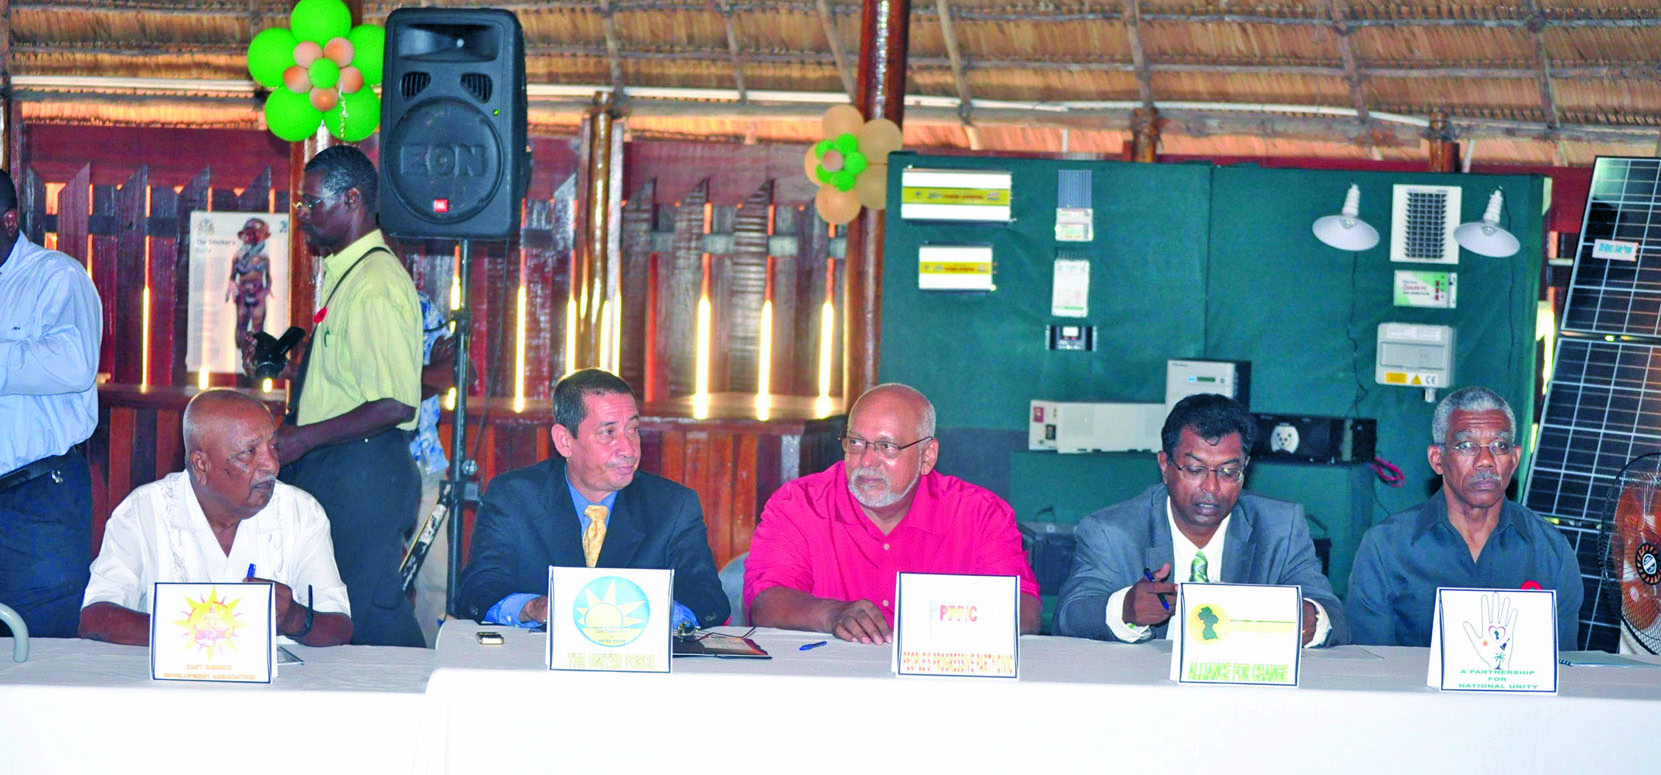 Political parties urged to honour election code of conduct – Guyana ...